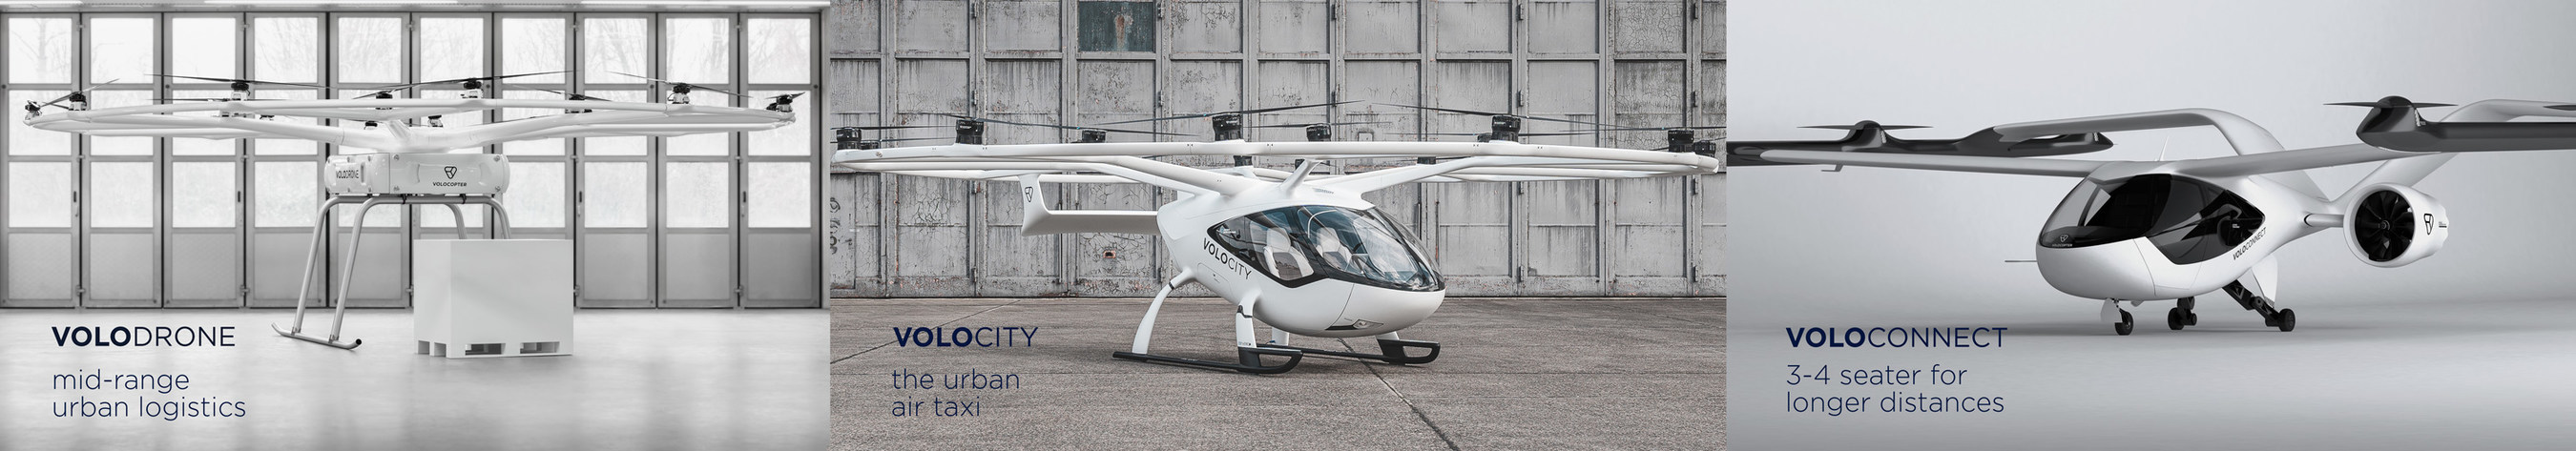 VoloConnect: Expanding Volocopter's Coverage of the Urban Air Mobility Ecosystem